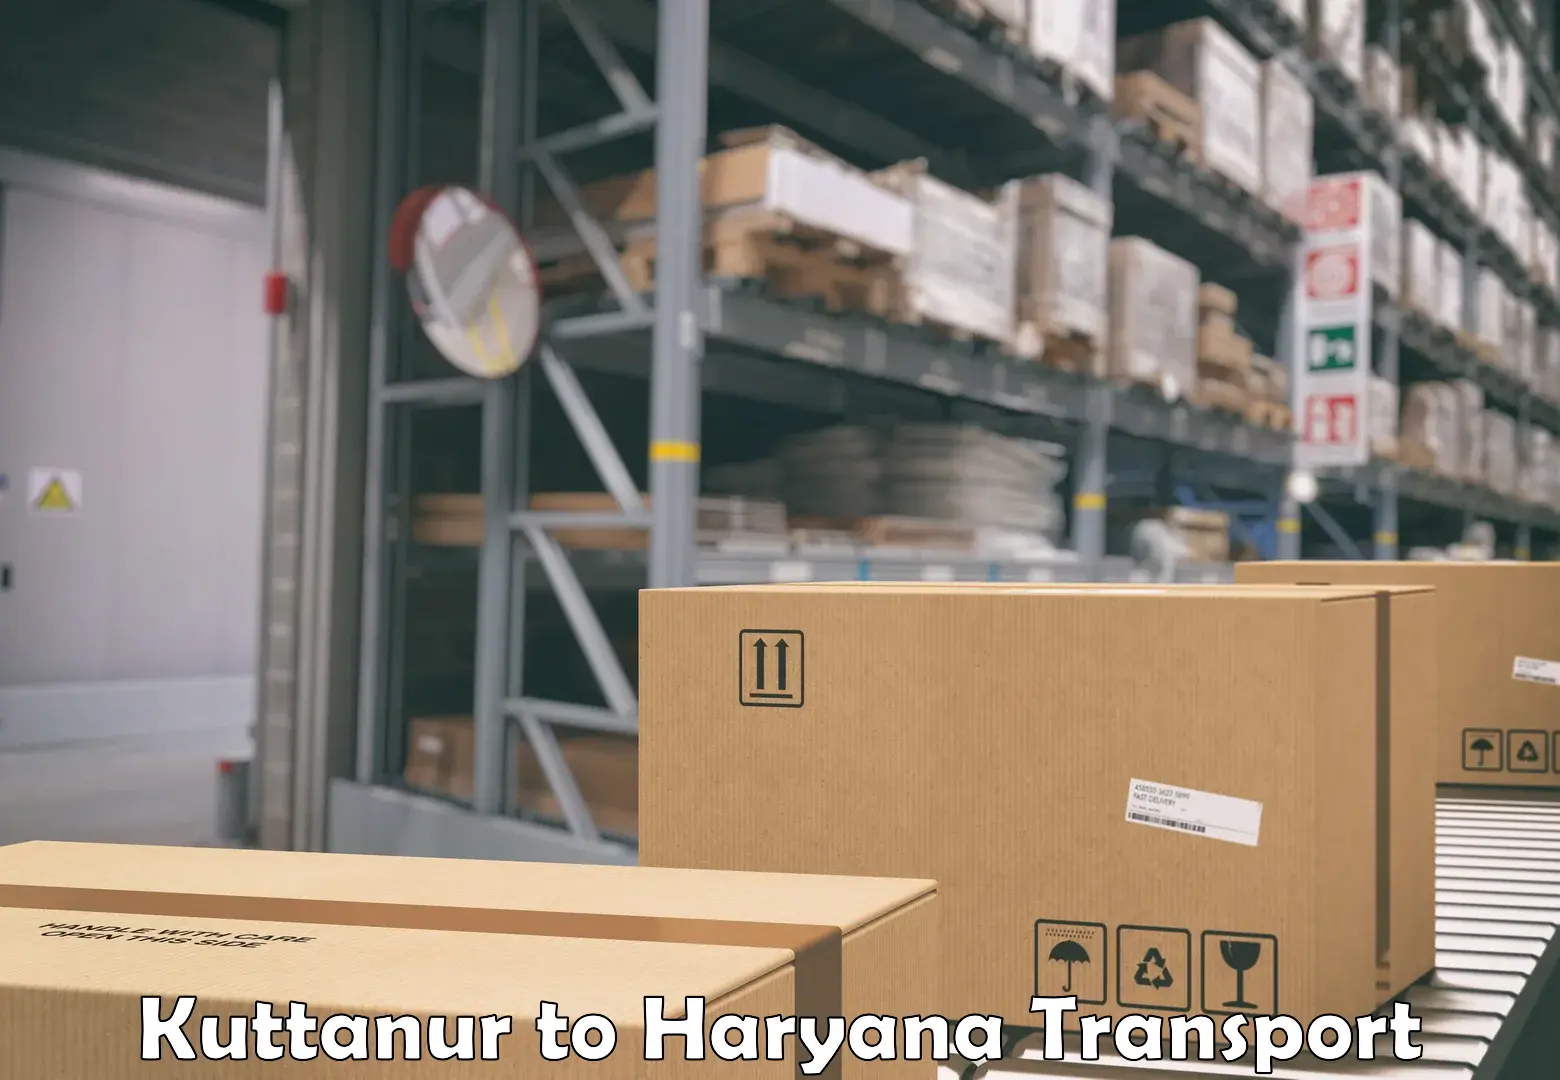 Furniture transport service Kuttanur to Chaudhary Charan Singh Haryana Agricultural University Hisar